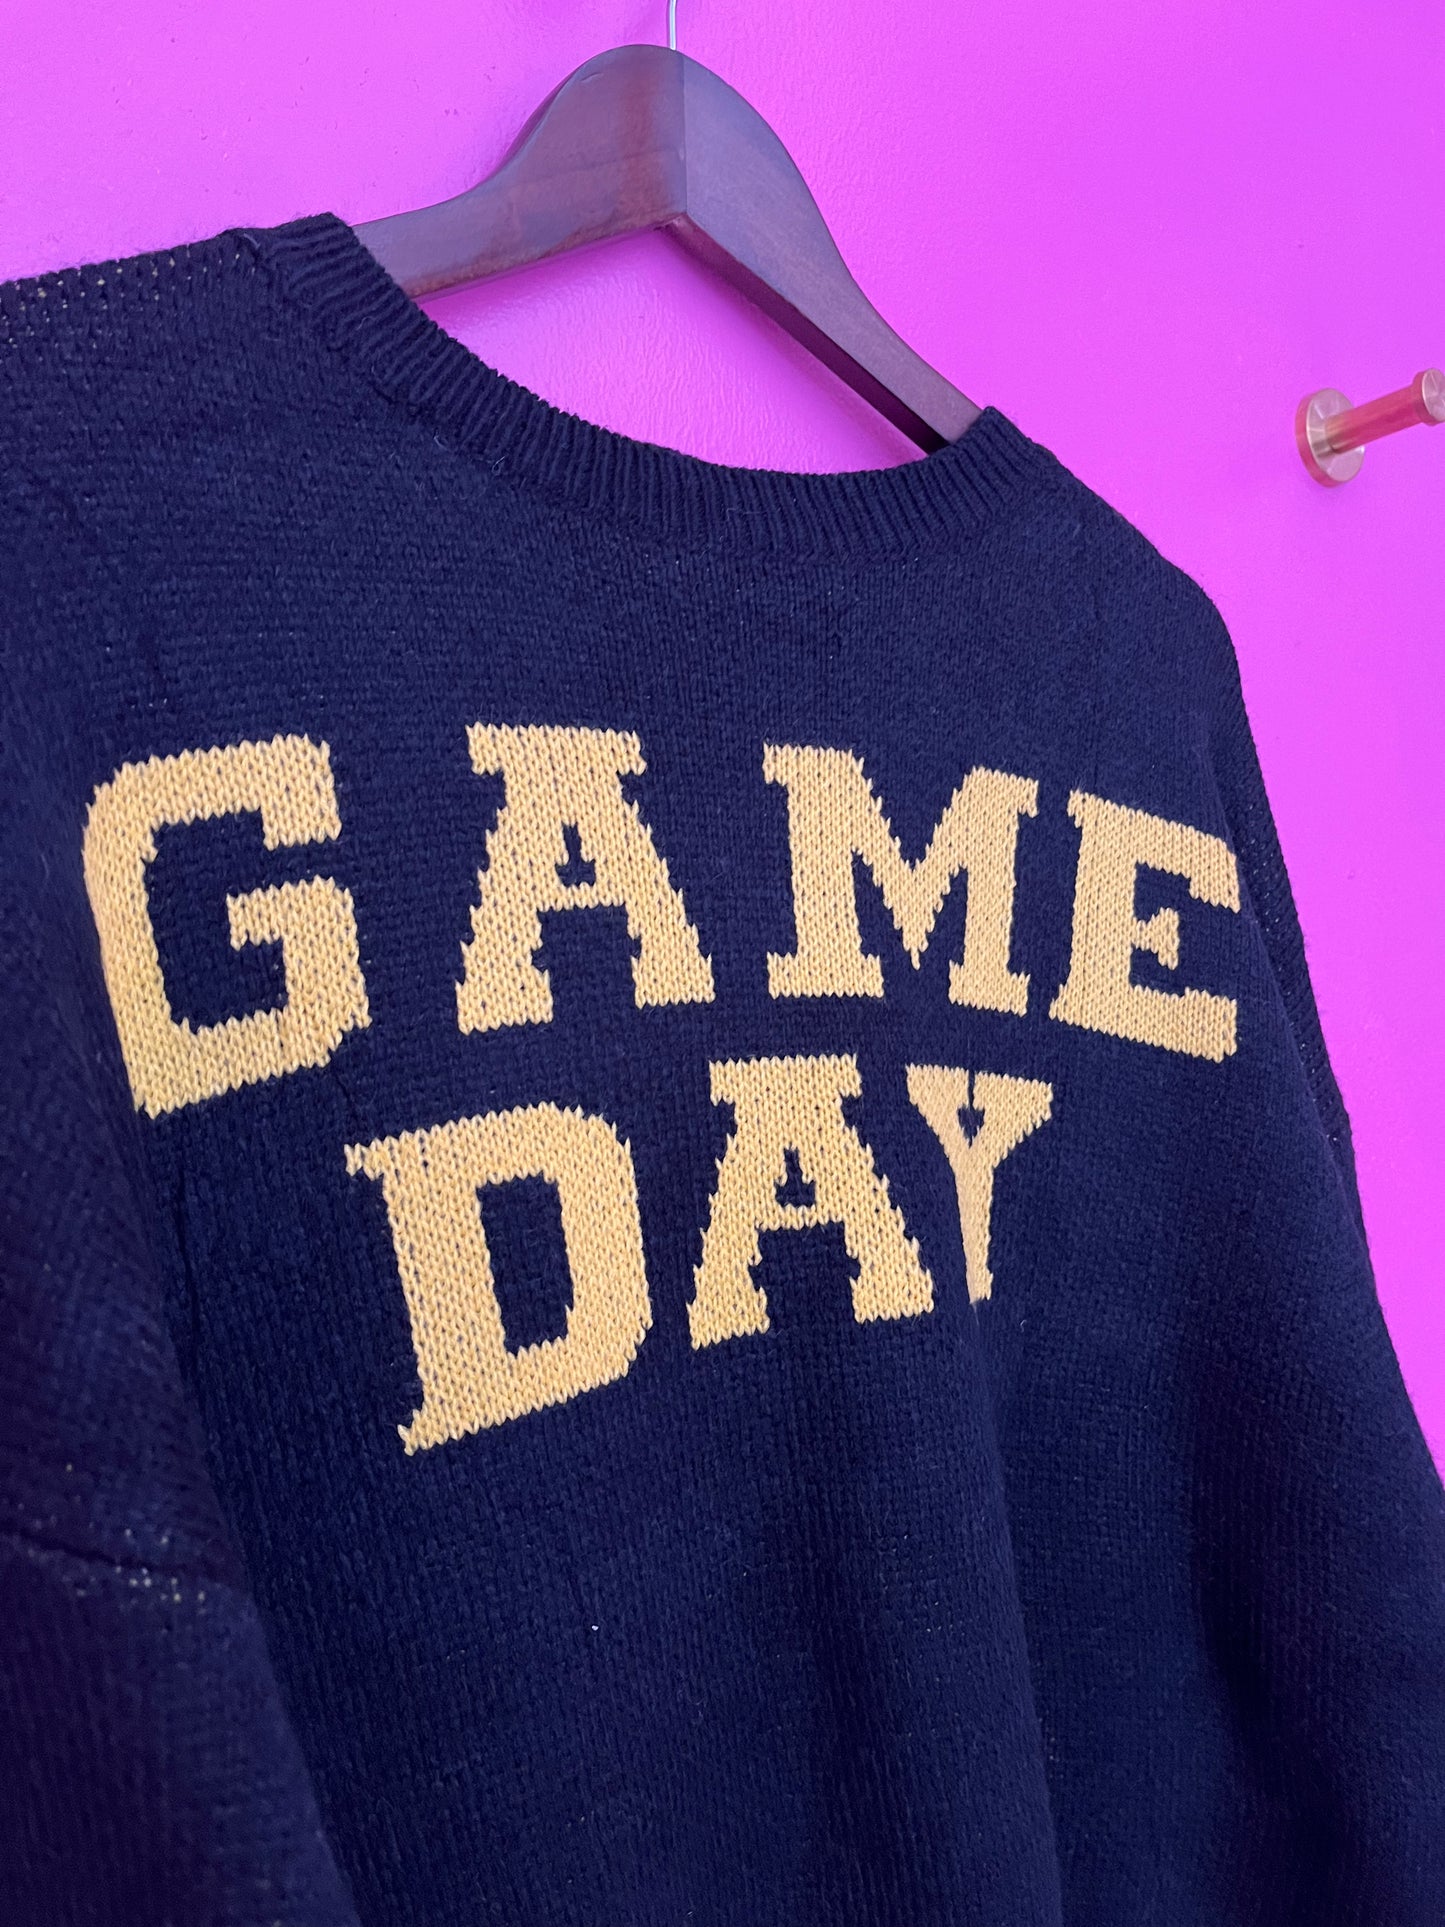 GAME DAY Black & Gold Sweater